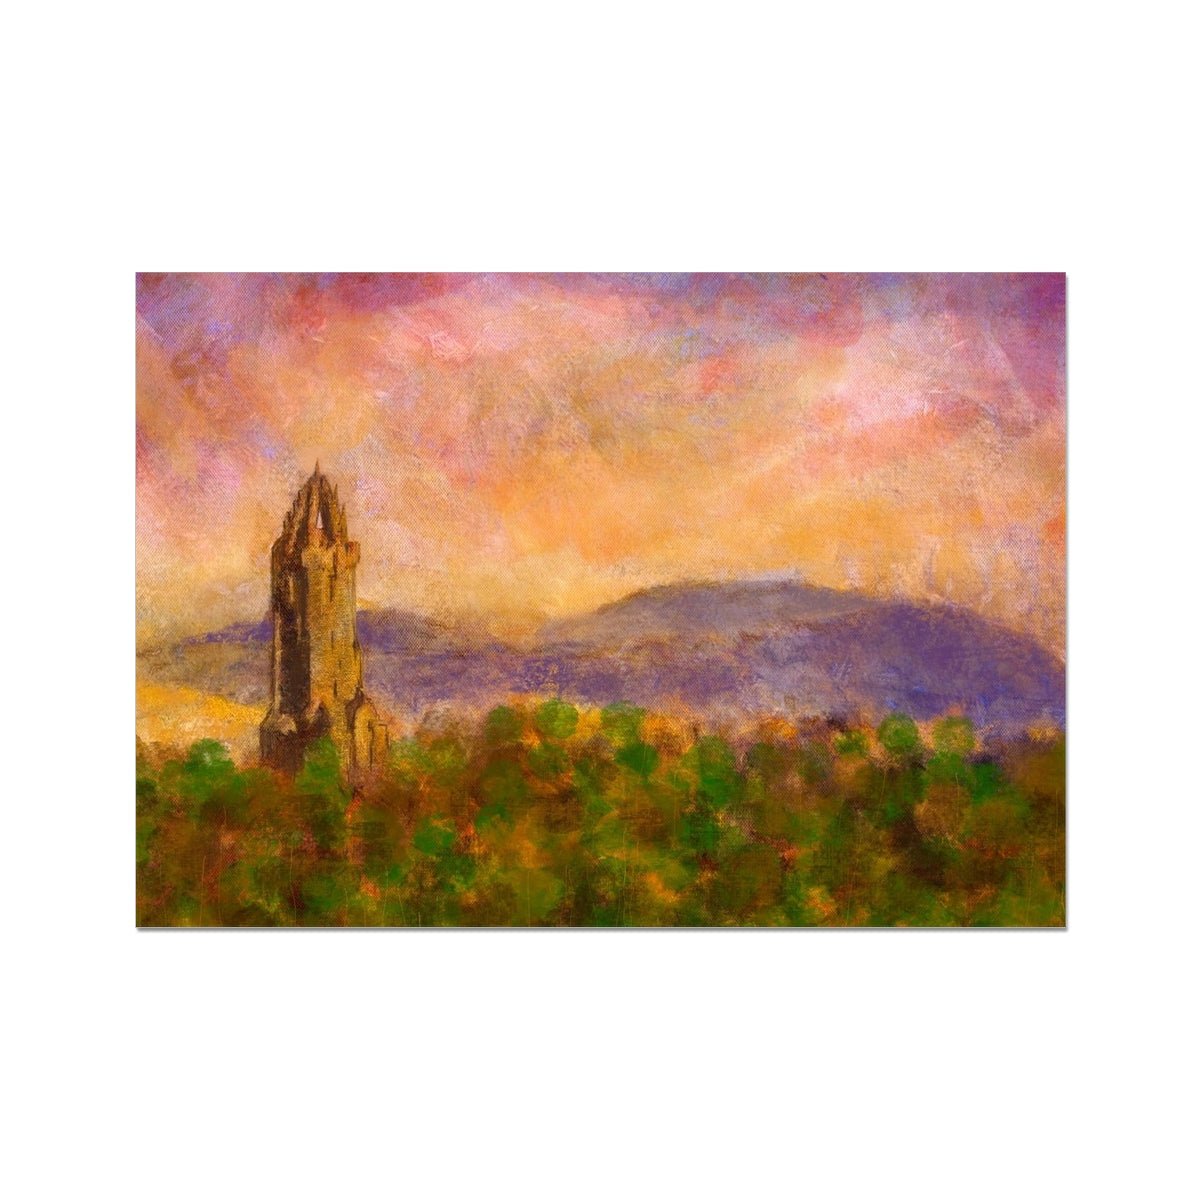 Wallace Monument Dusk Painting | Fine Art Prints From Scotland-Unframed Prints-Historic & Iconic Scotland Art Gallery-A2 Landscape-Paintings, Prints, Homeware, Art Gifts From Scotland By Scottish Artist Kevin Hunter